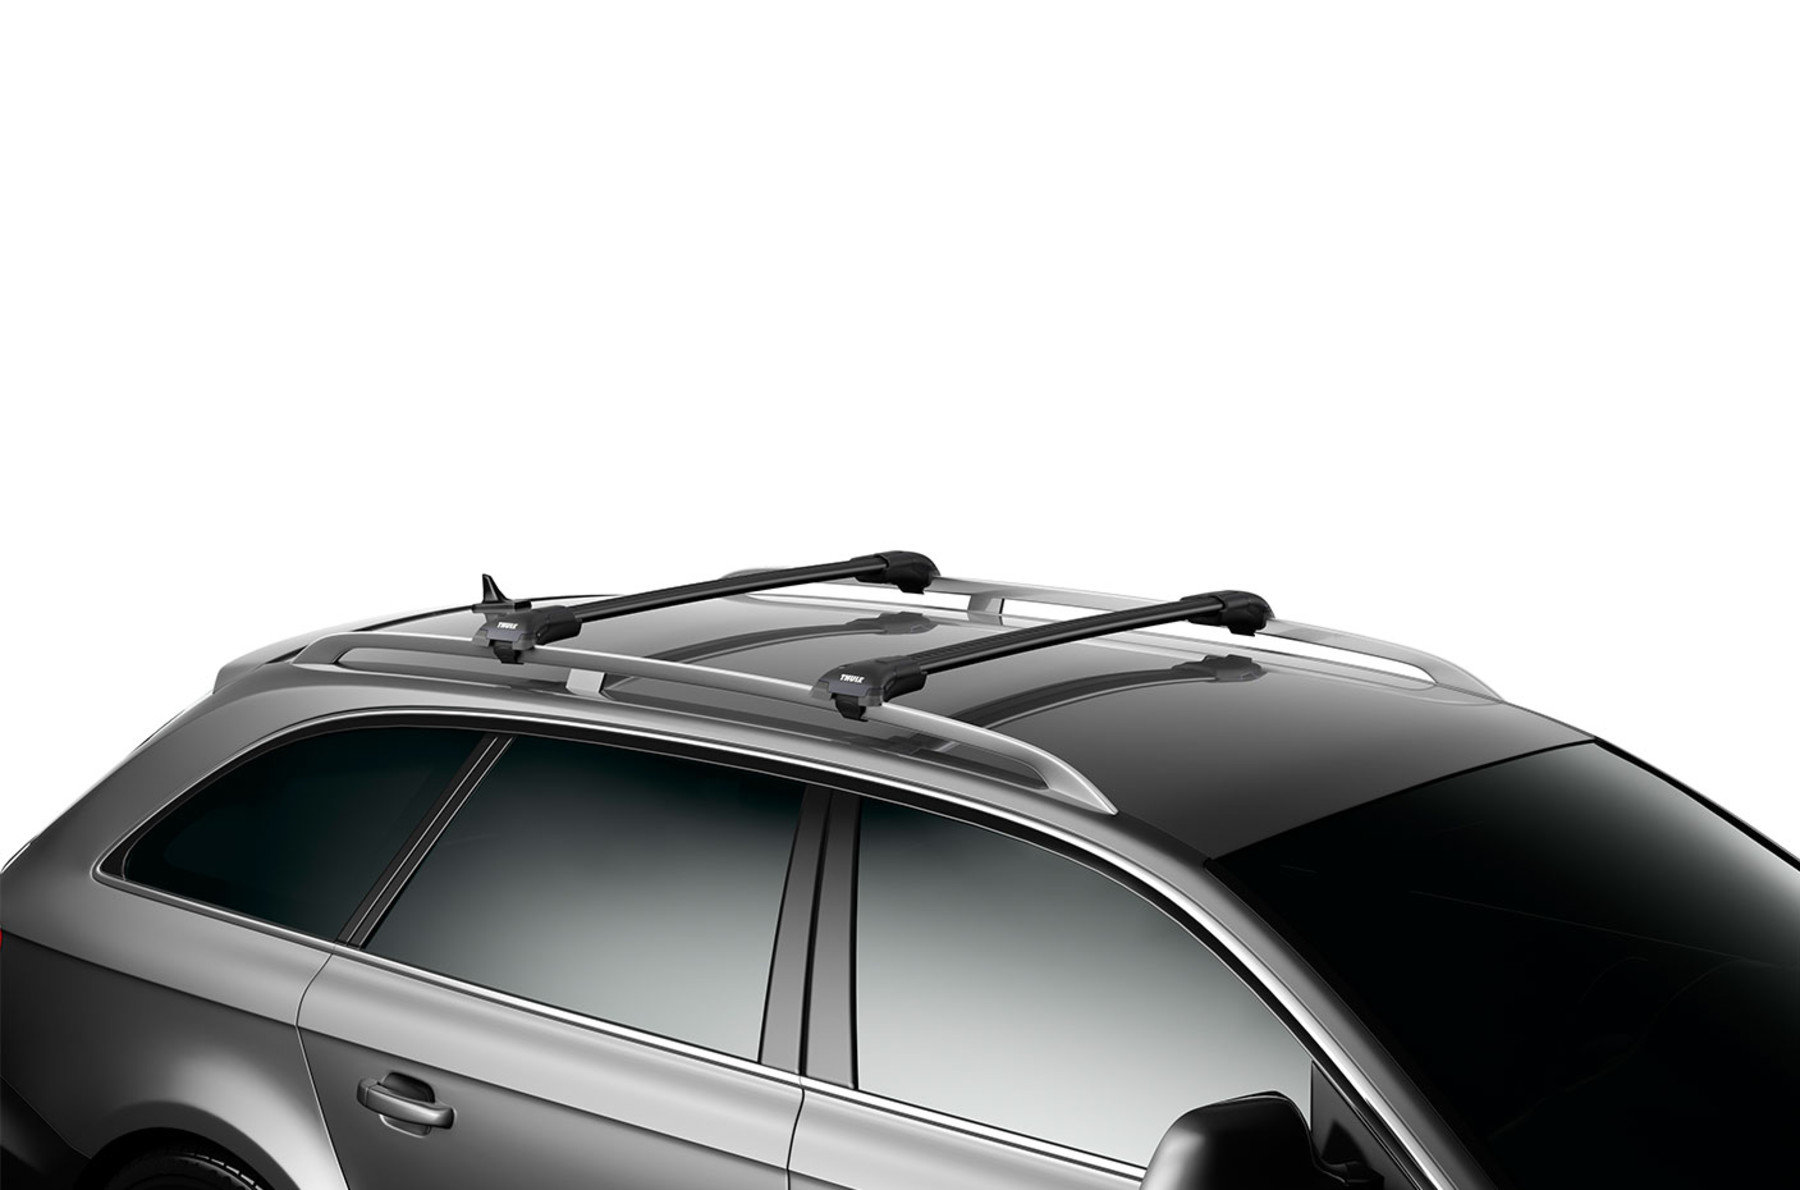 FOR 2014-2020 JEEP CHEROKEE FACTORY STAYLE LUGGAGE TOP ROOF RACK RAIL CROSS BARS